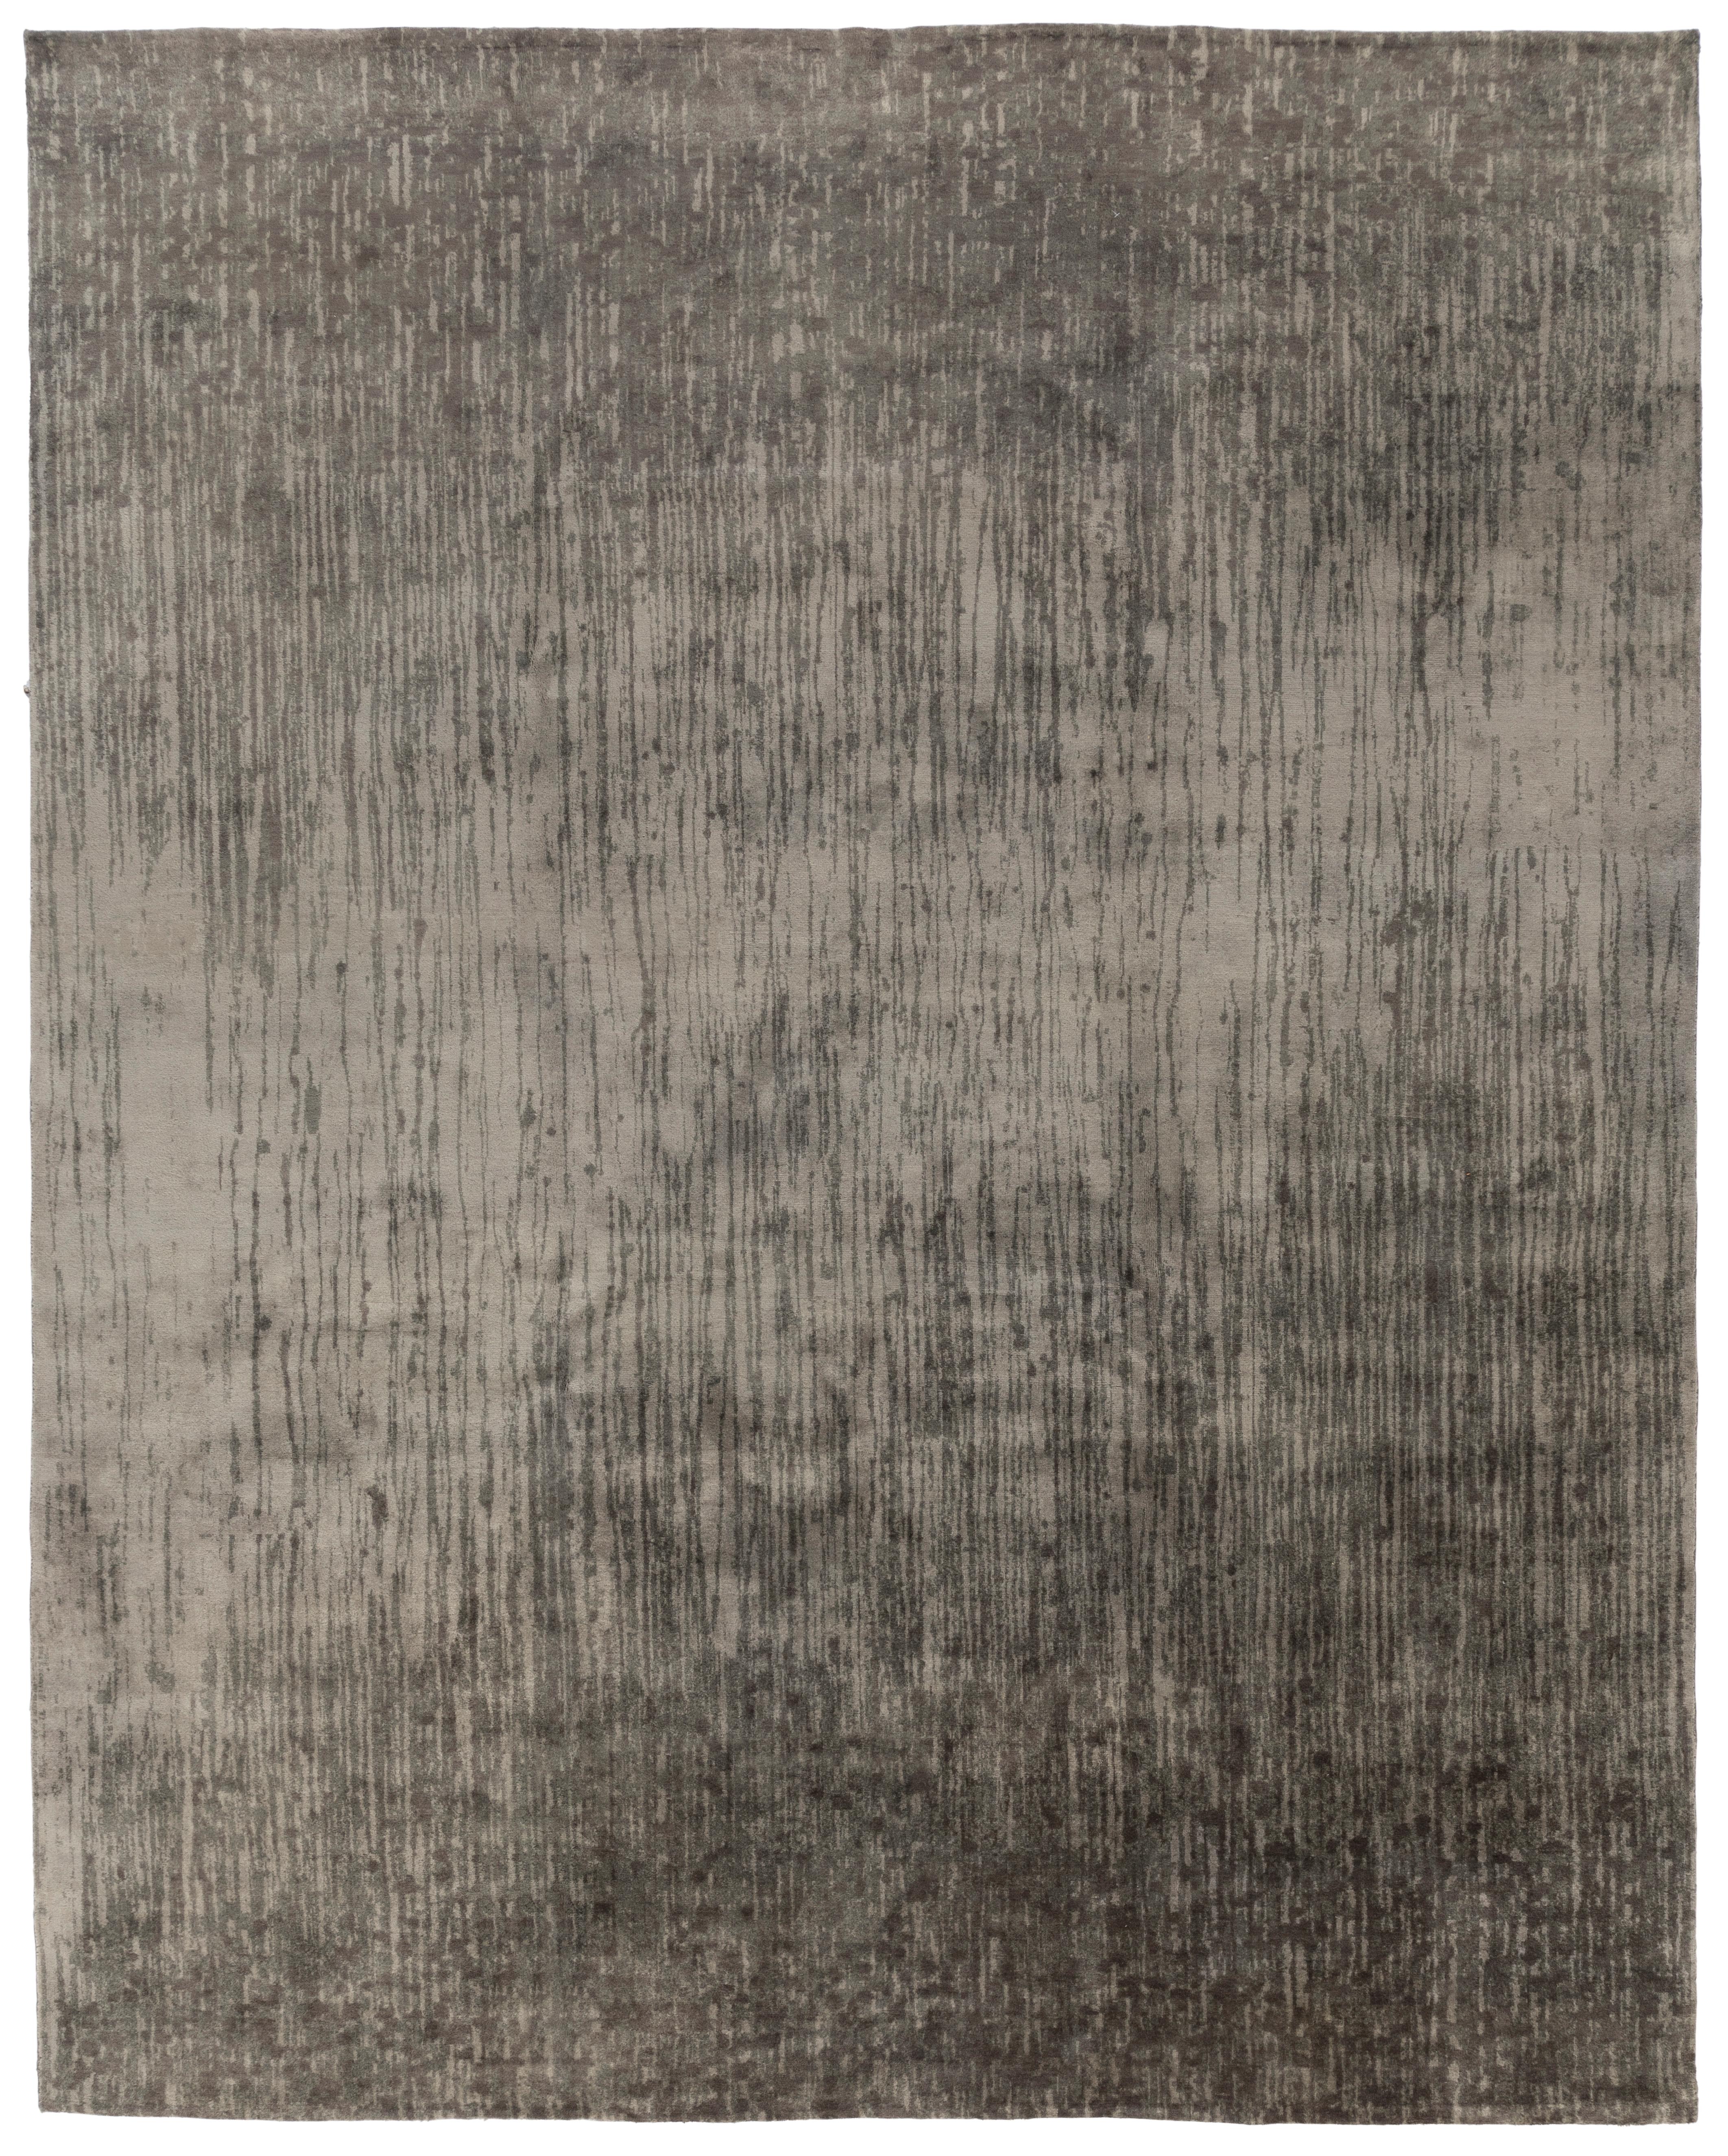 Indian Tufenkian Carpets, Waterfall Charcoal, Contemporary/Modern, Greys For Sale